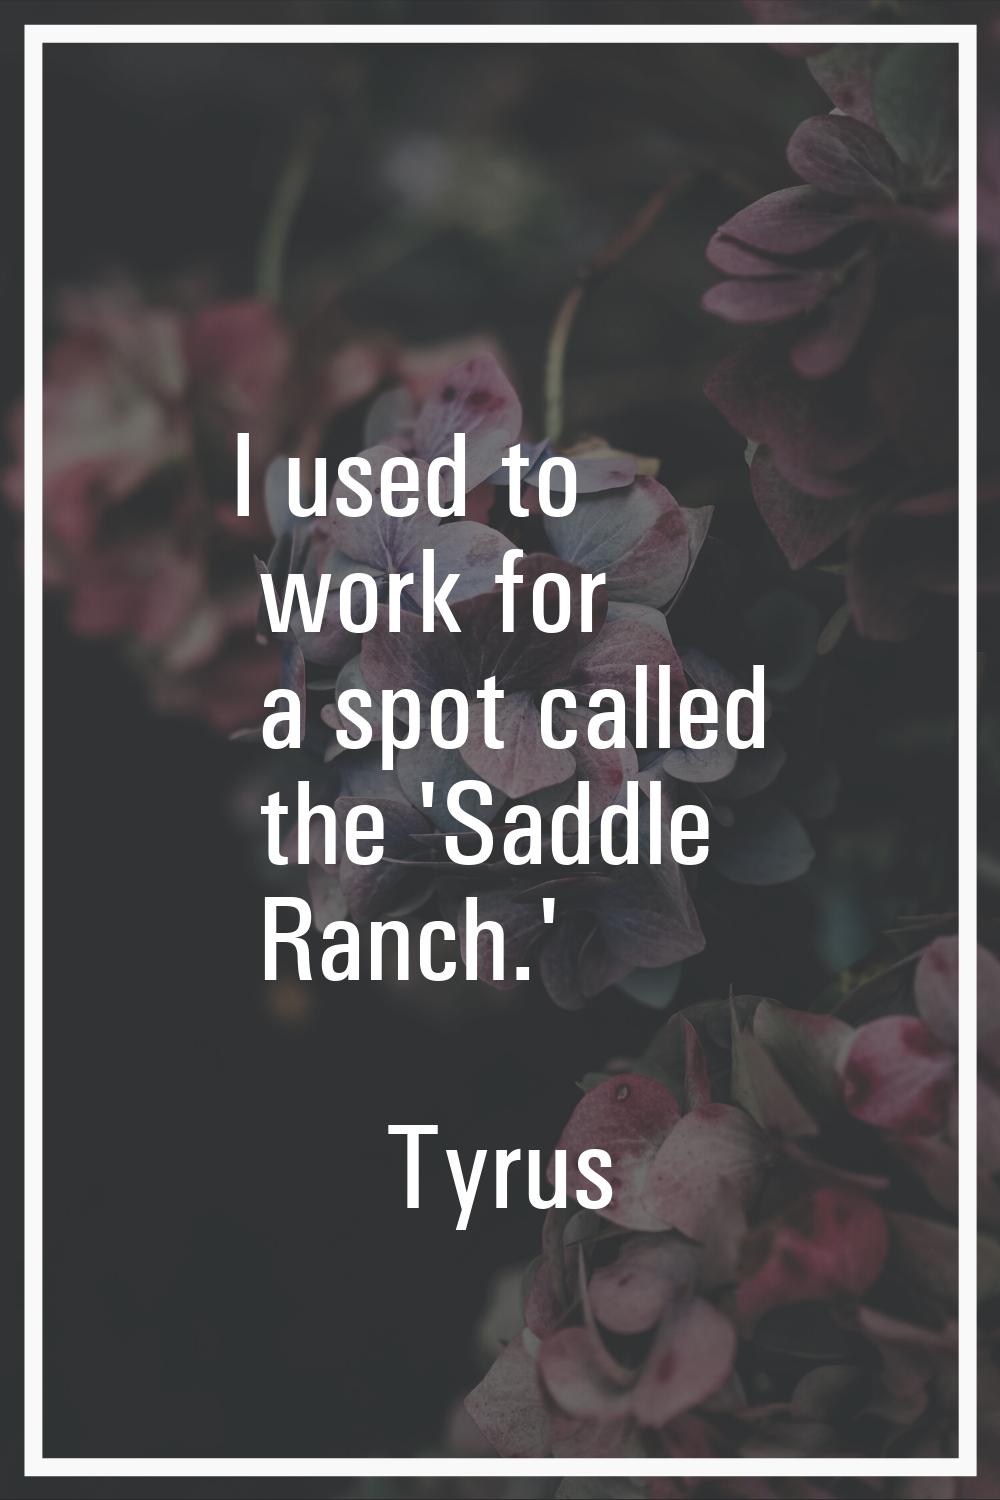 I used to work for a spot called the 'Saddle Ranch.'